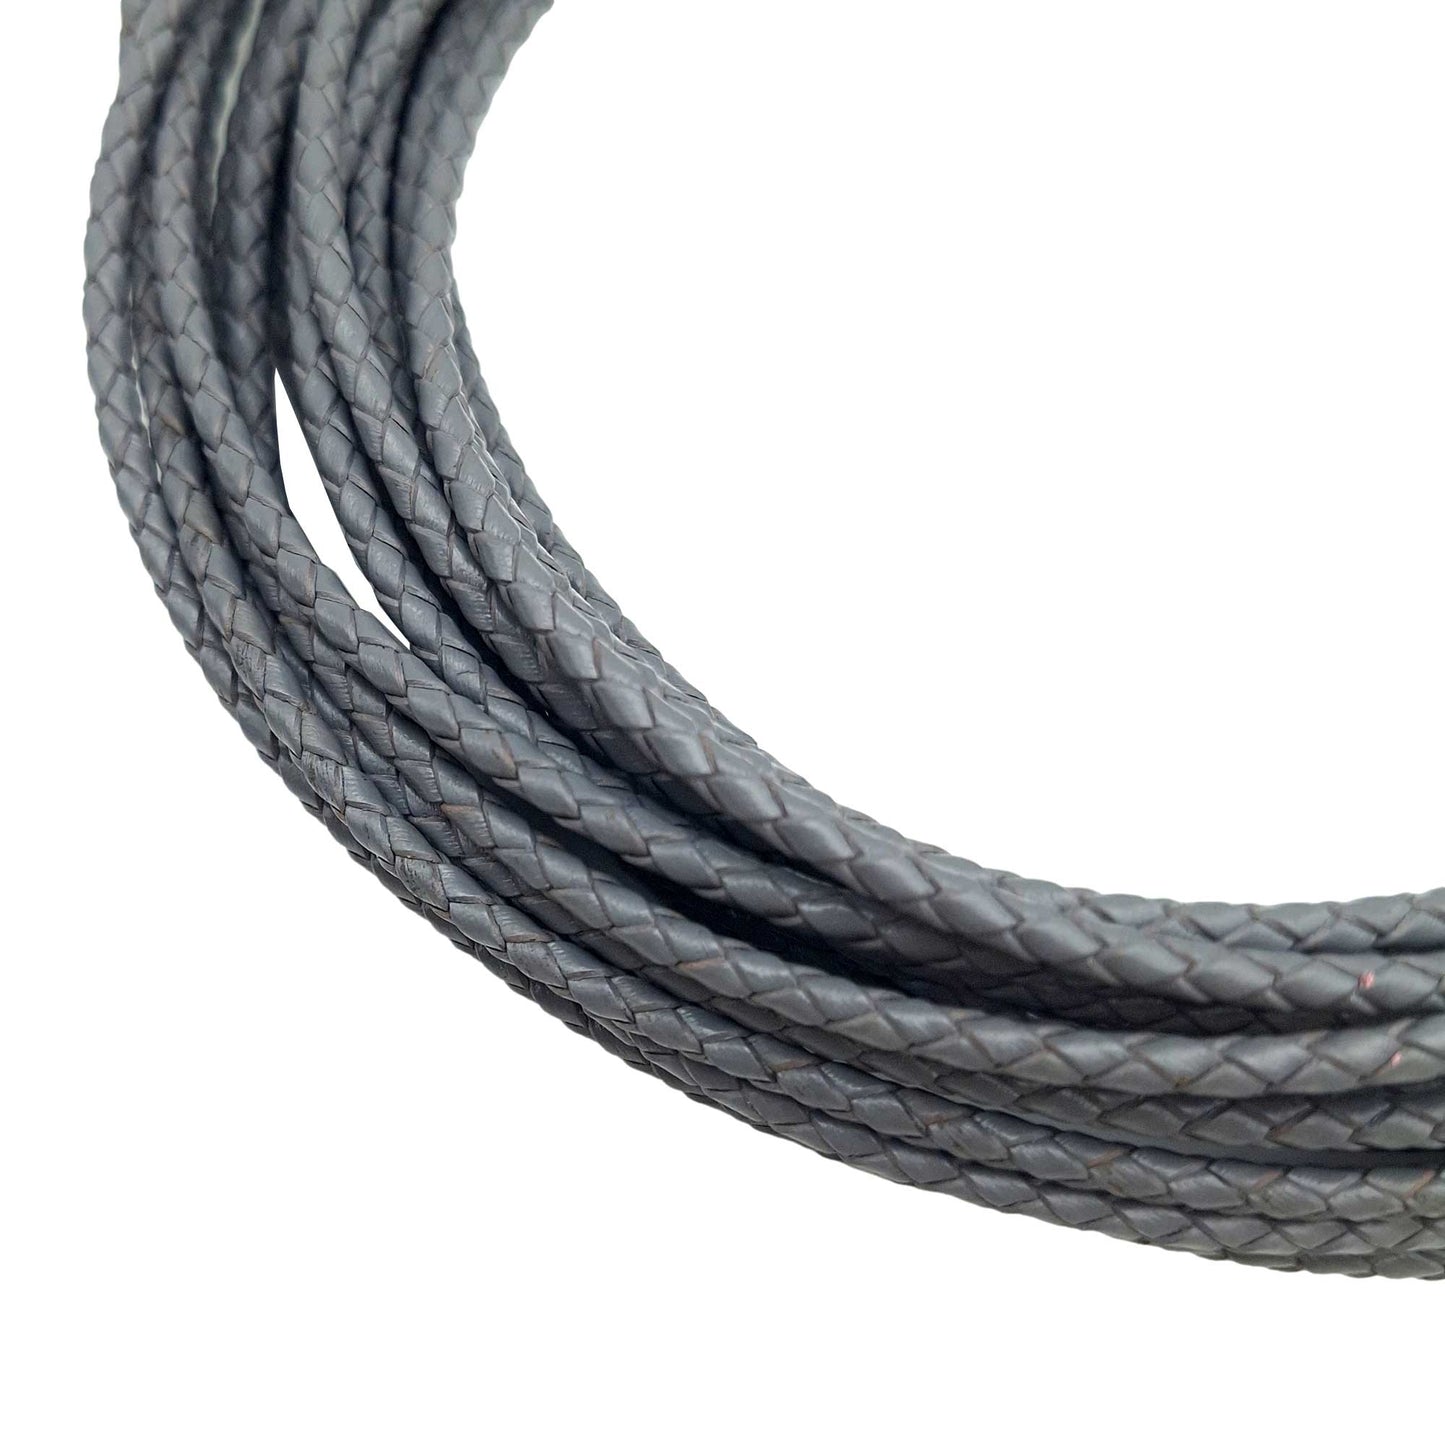 shapesbyX Darker Gray Braided Leather Bolos Cords 3mm Round